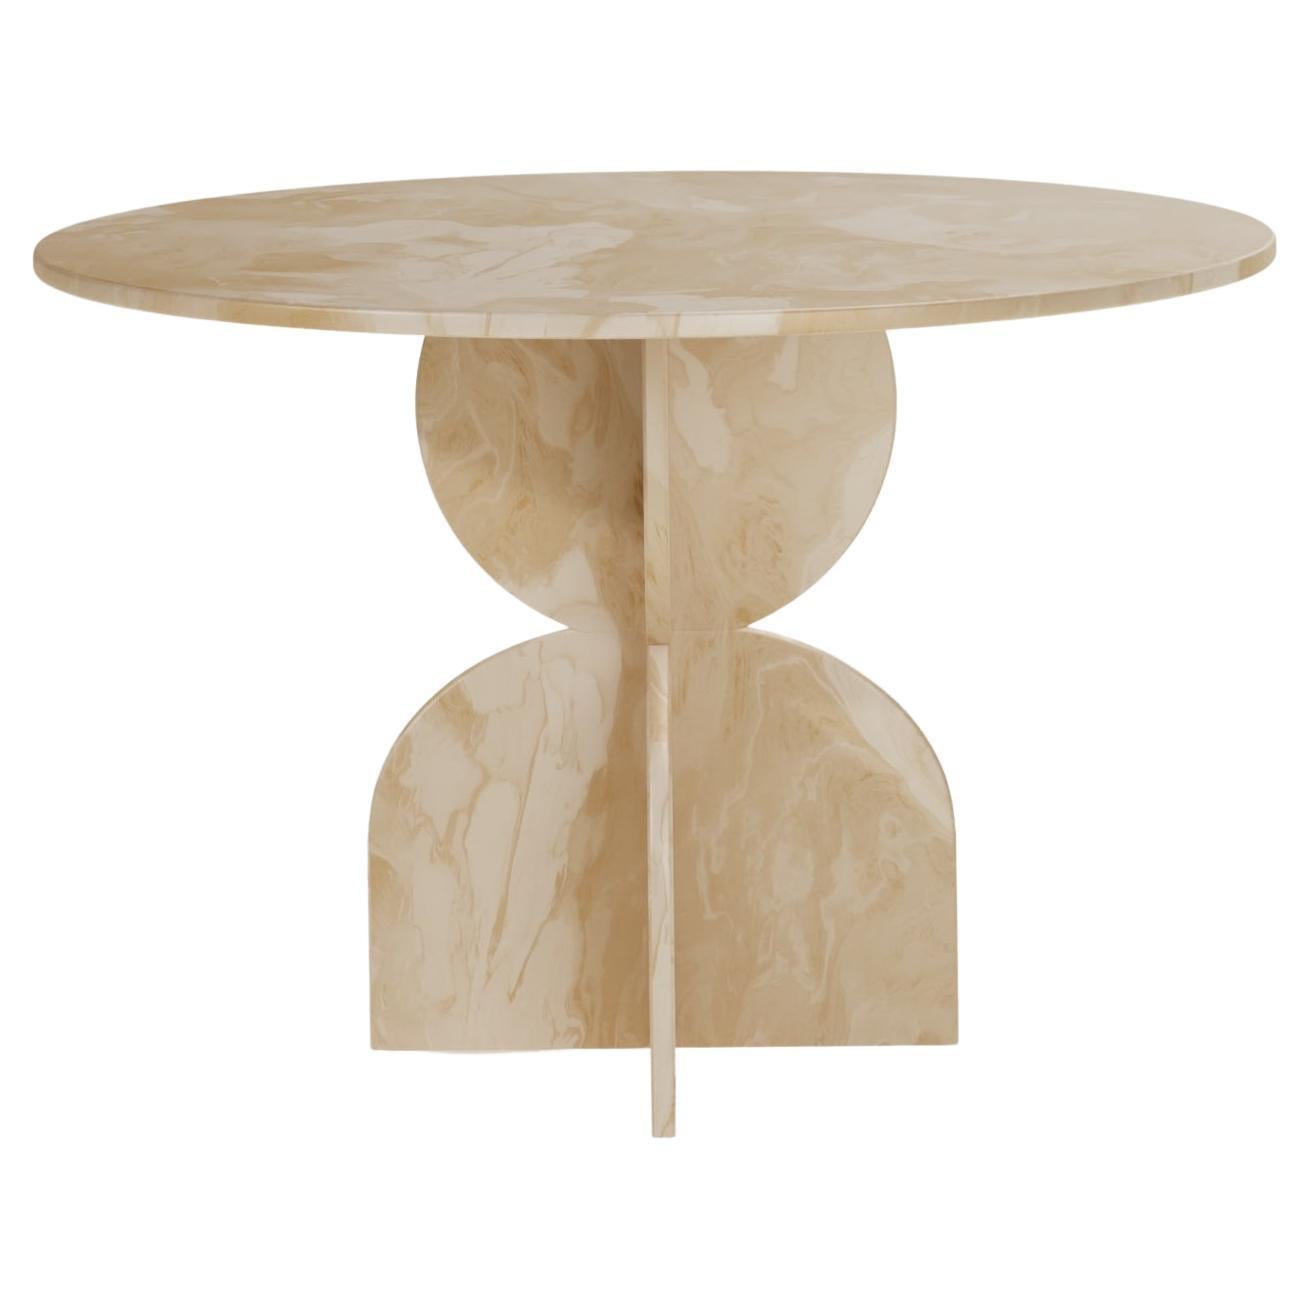 Contemporary Beige Round Table Handcrafted 100% Recycled Plastic by Anqa Studios